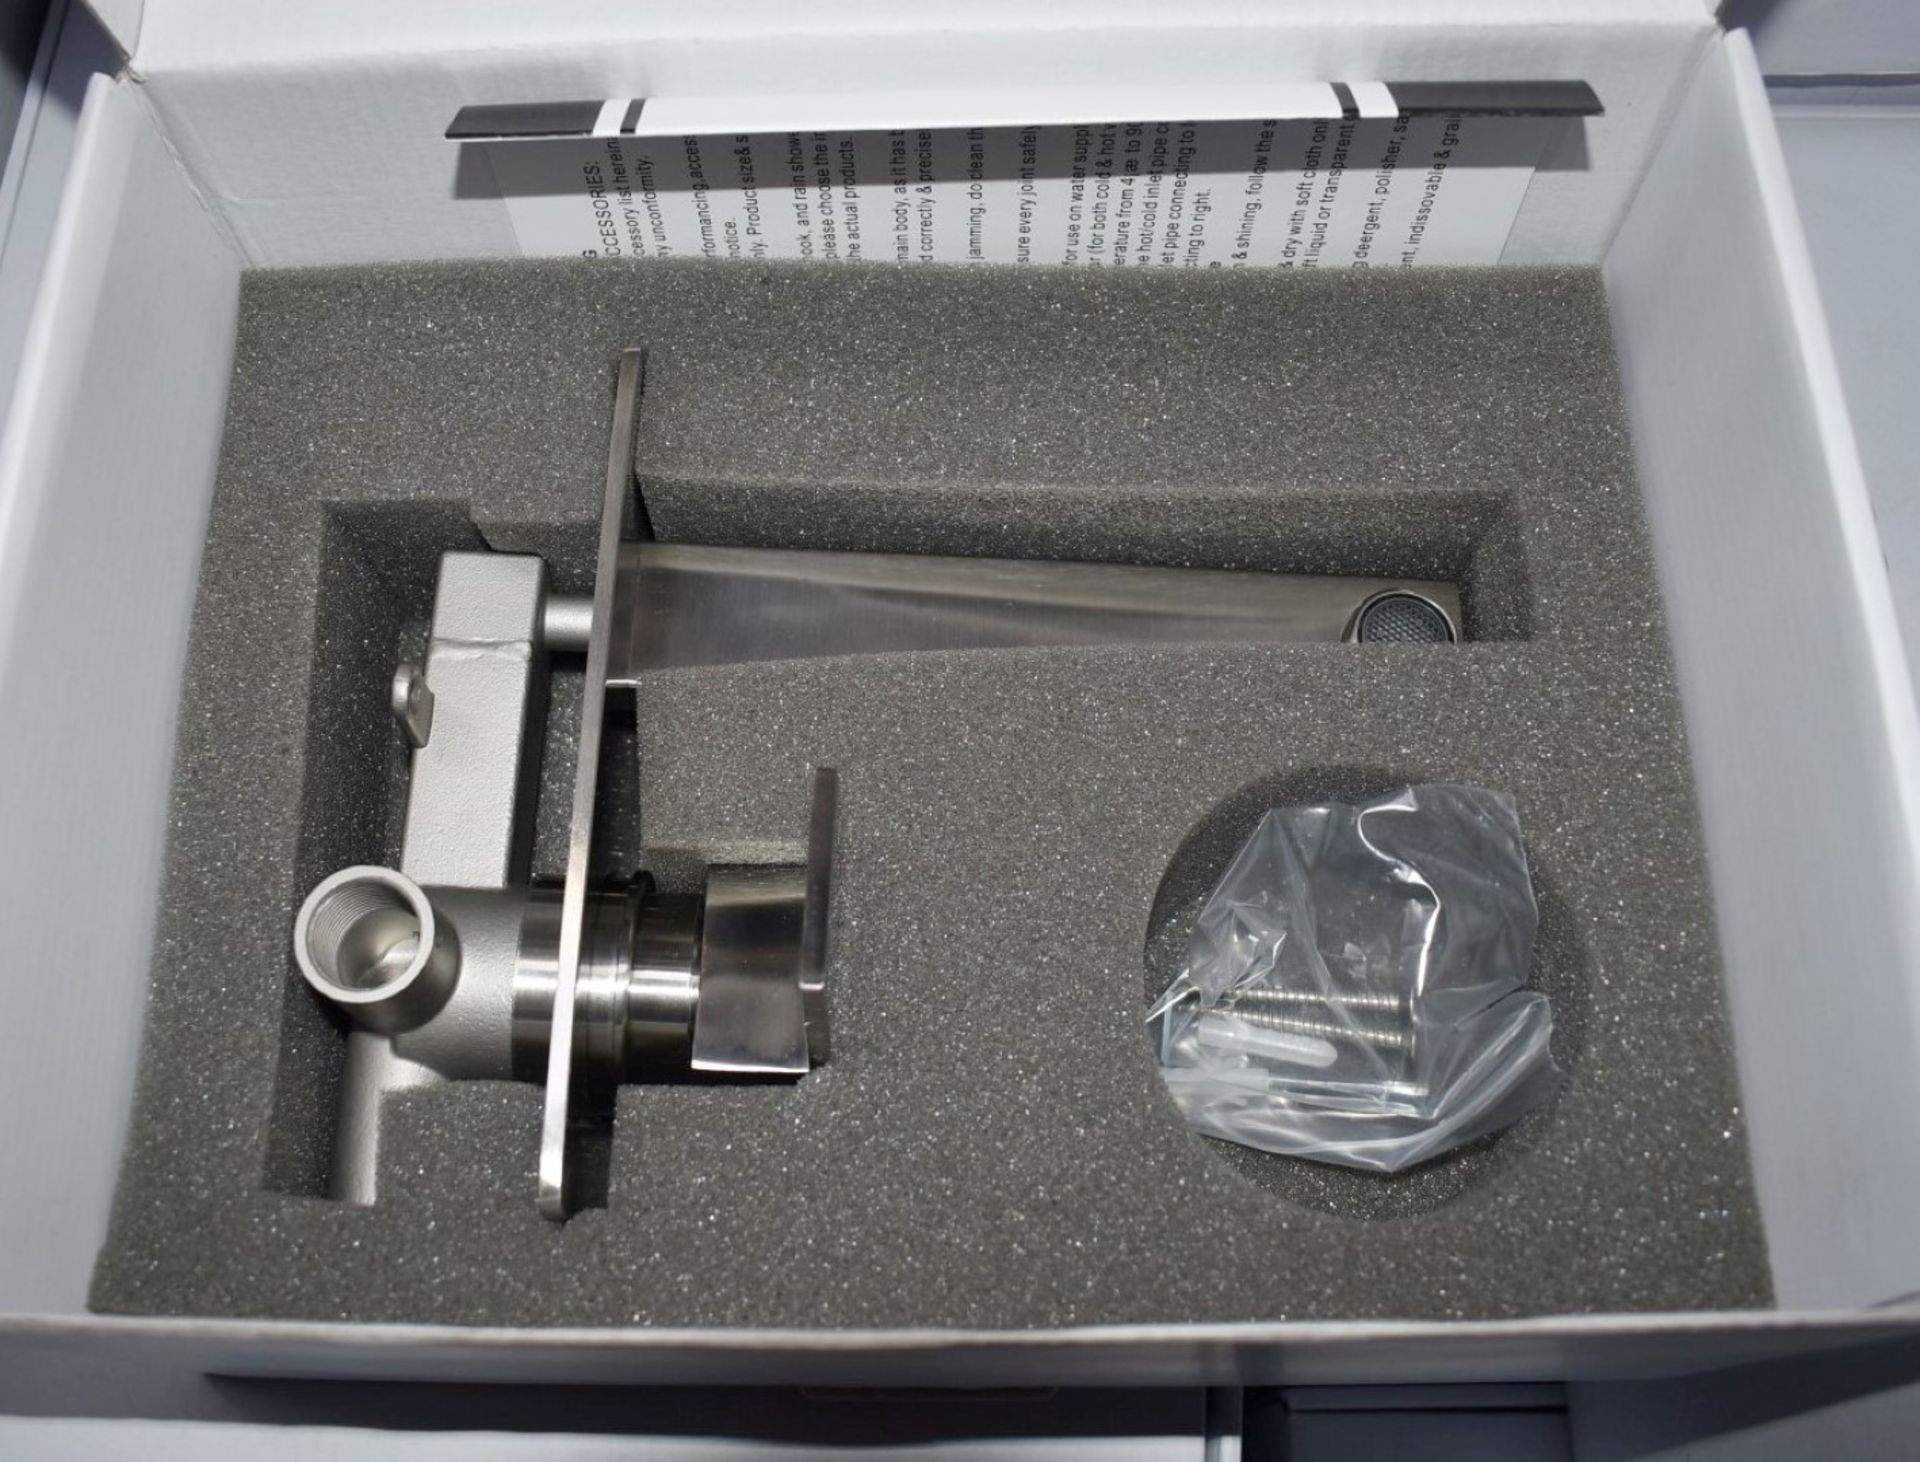 1 x Stonearth 'Metro' Stainless Steel Wall Mounted Tap - Brand New & Boxed - RRP £345 - Ref: TP823 - Image 8 of 8